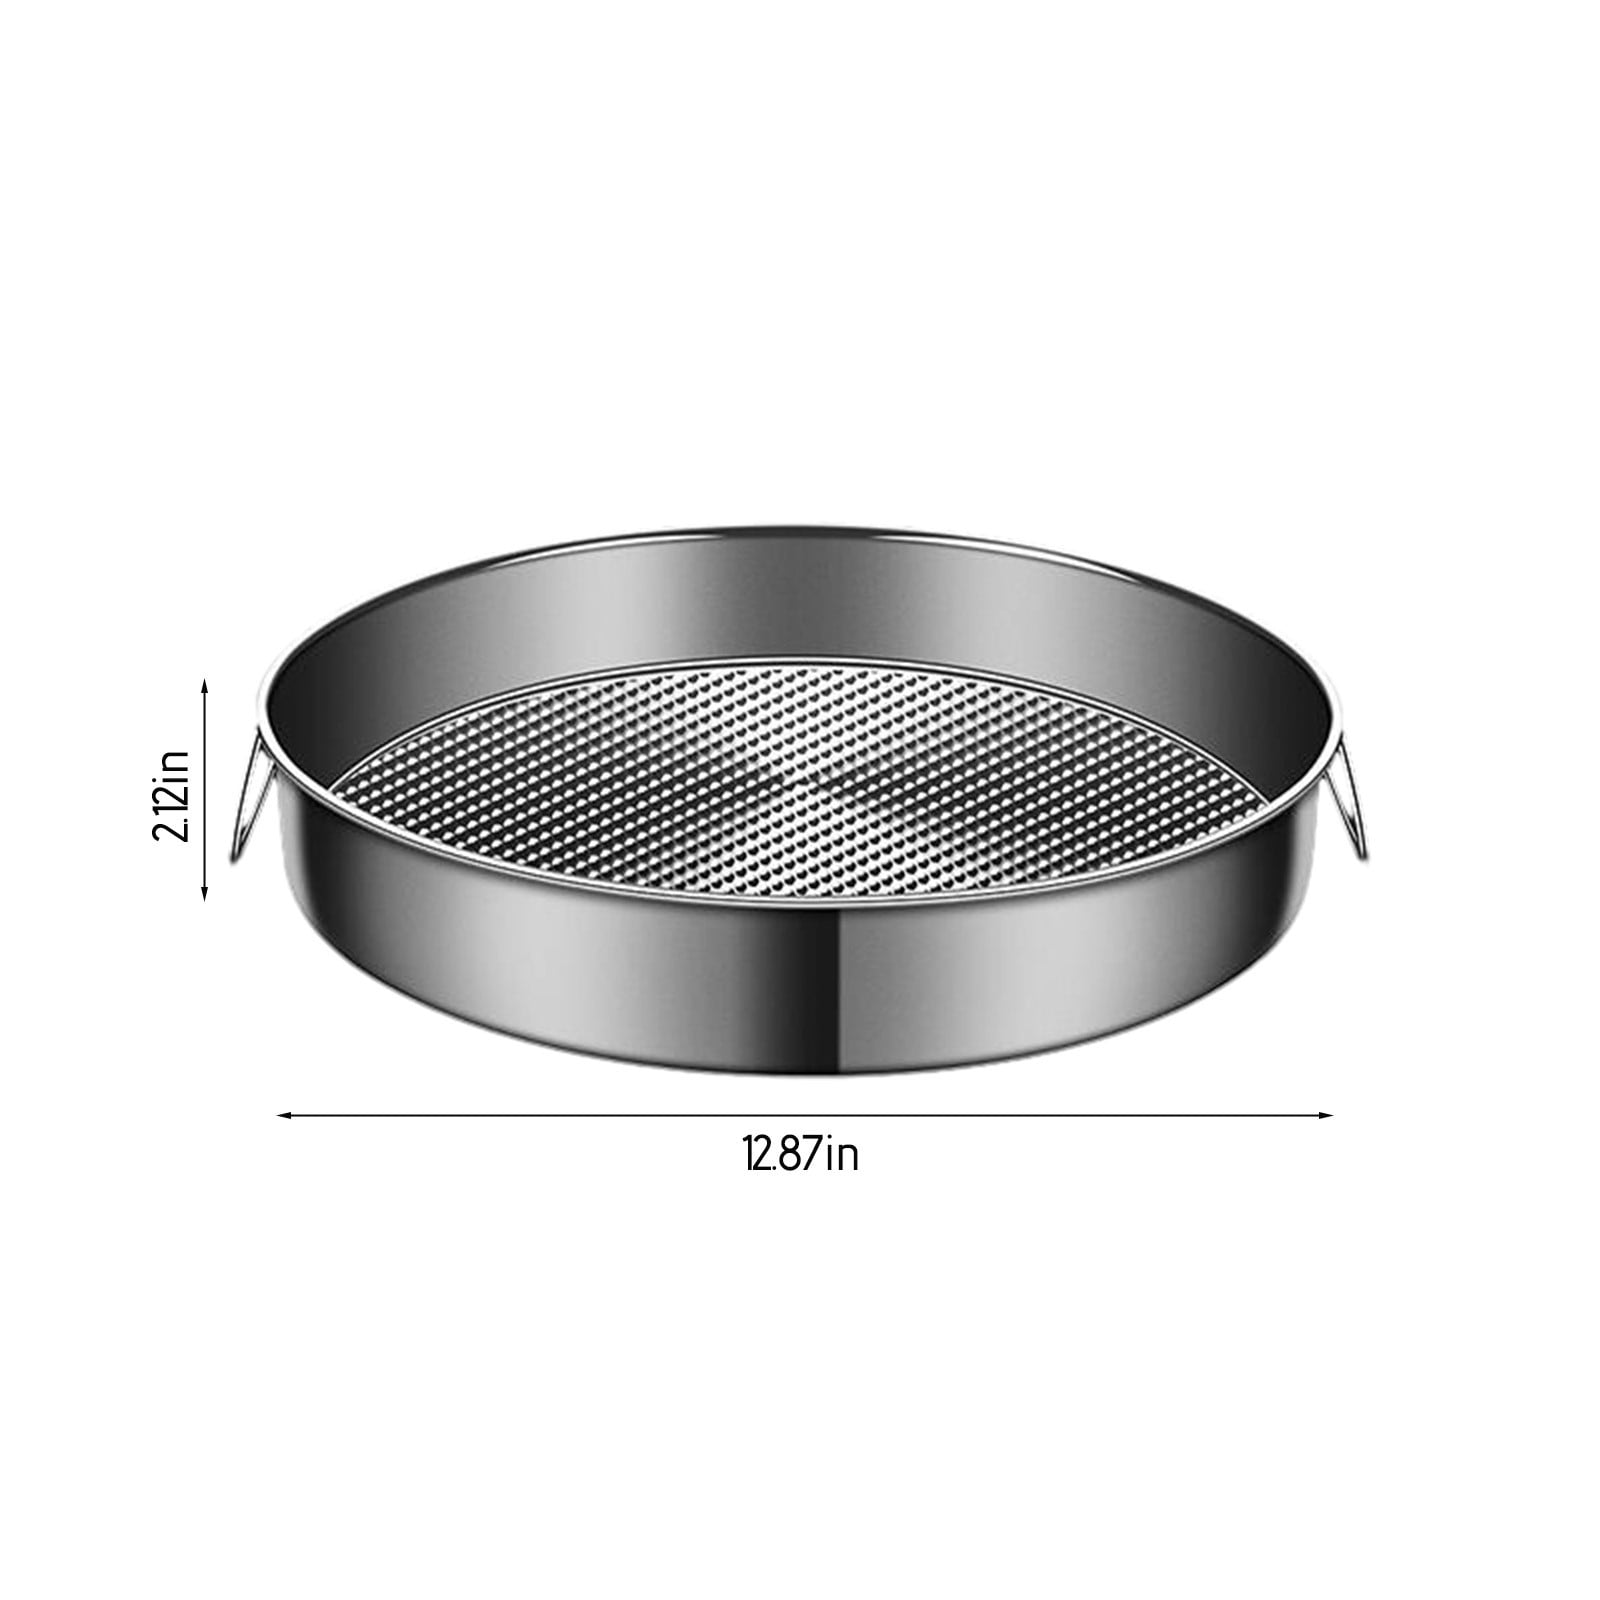 Pompotops 304 Stainless Steel Steaming Cake Pan, Multi-purpose Steaming ...